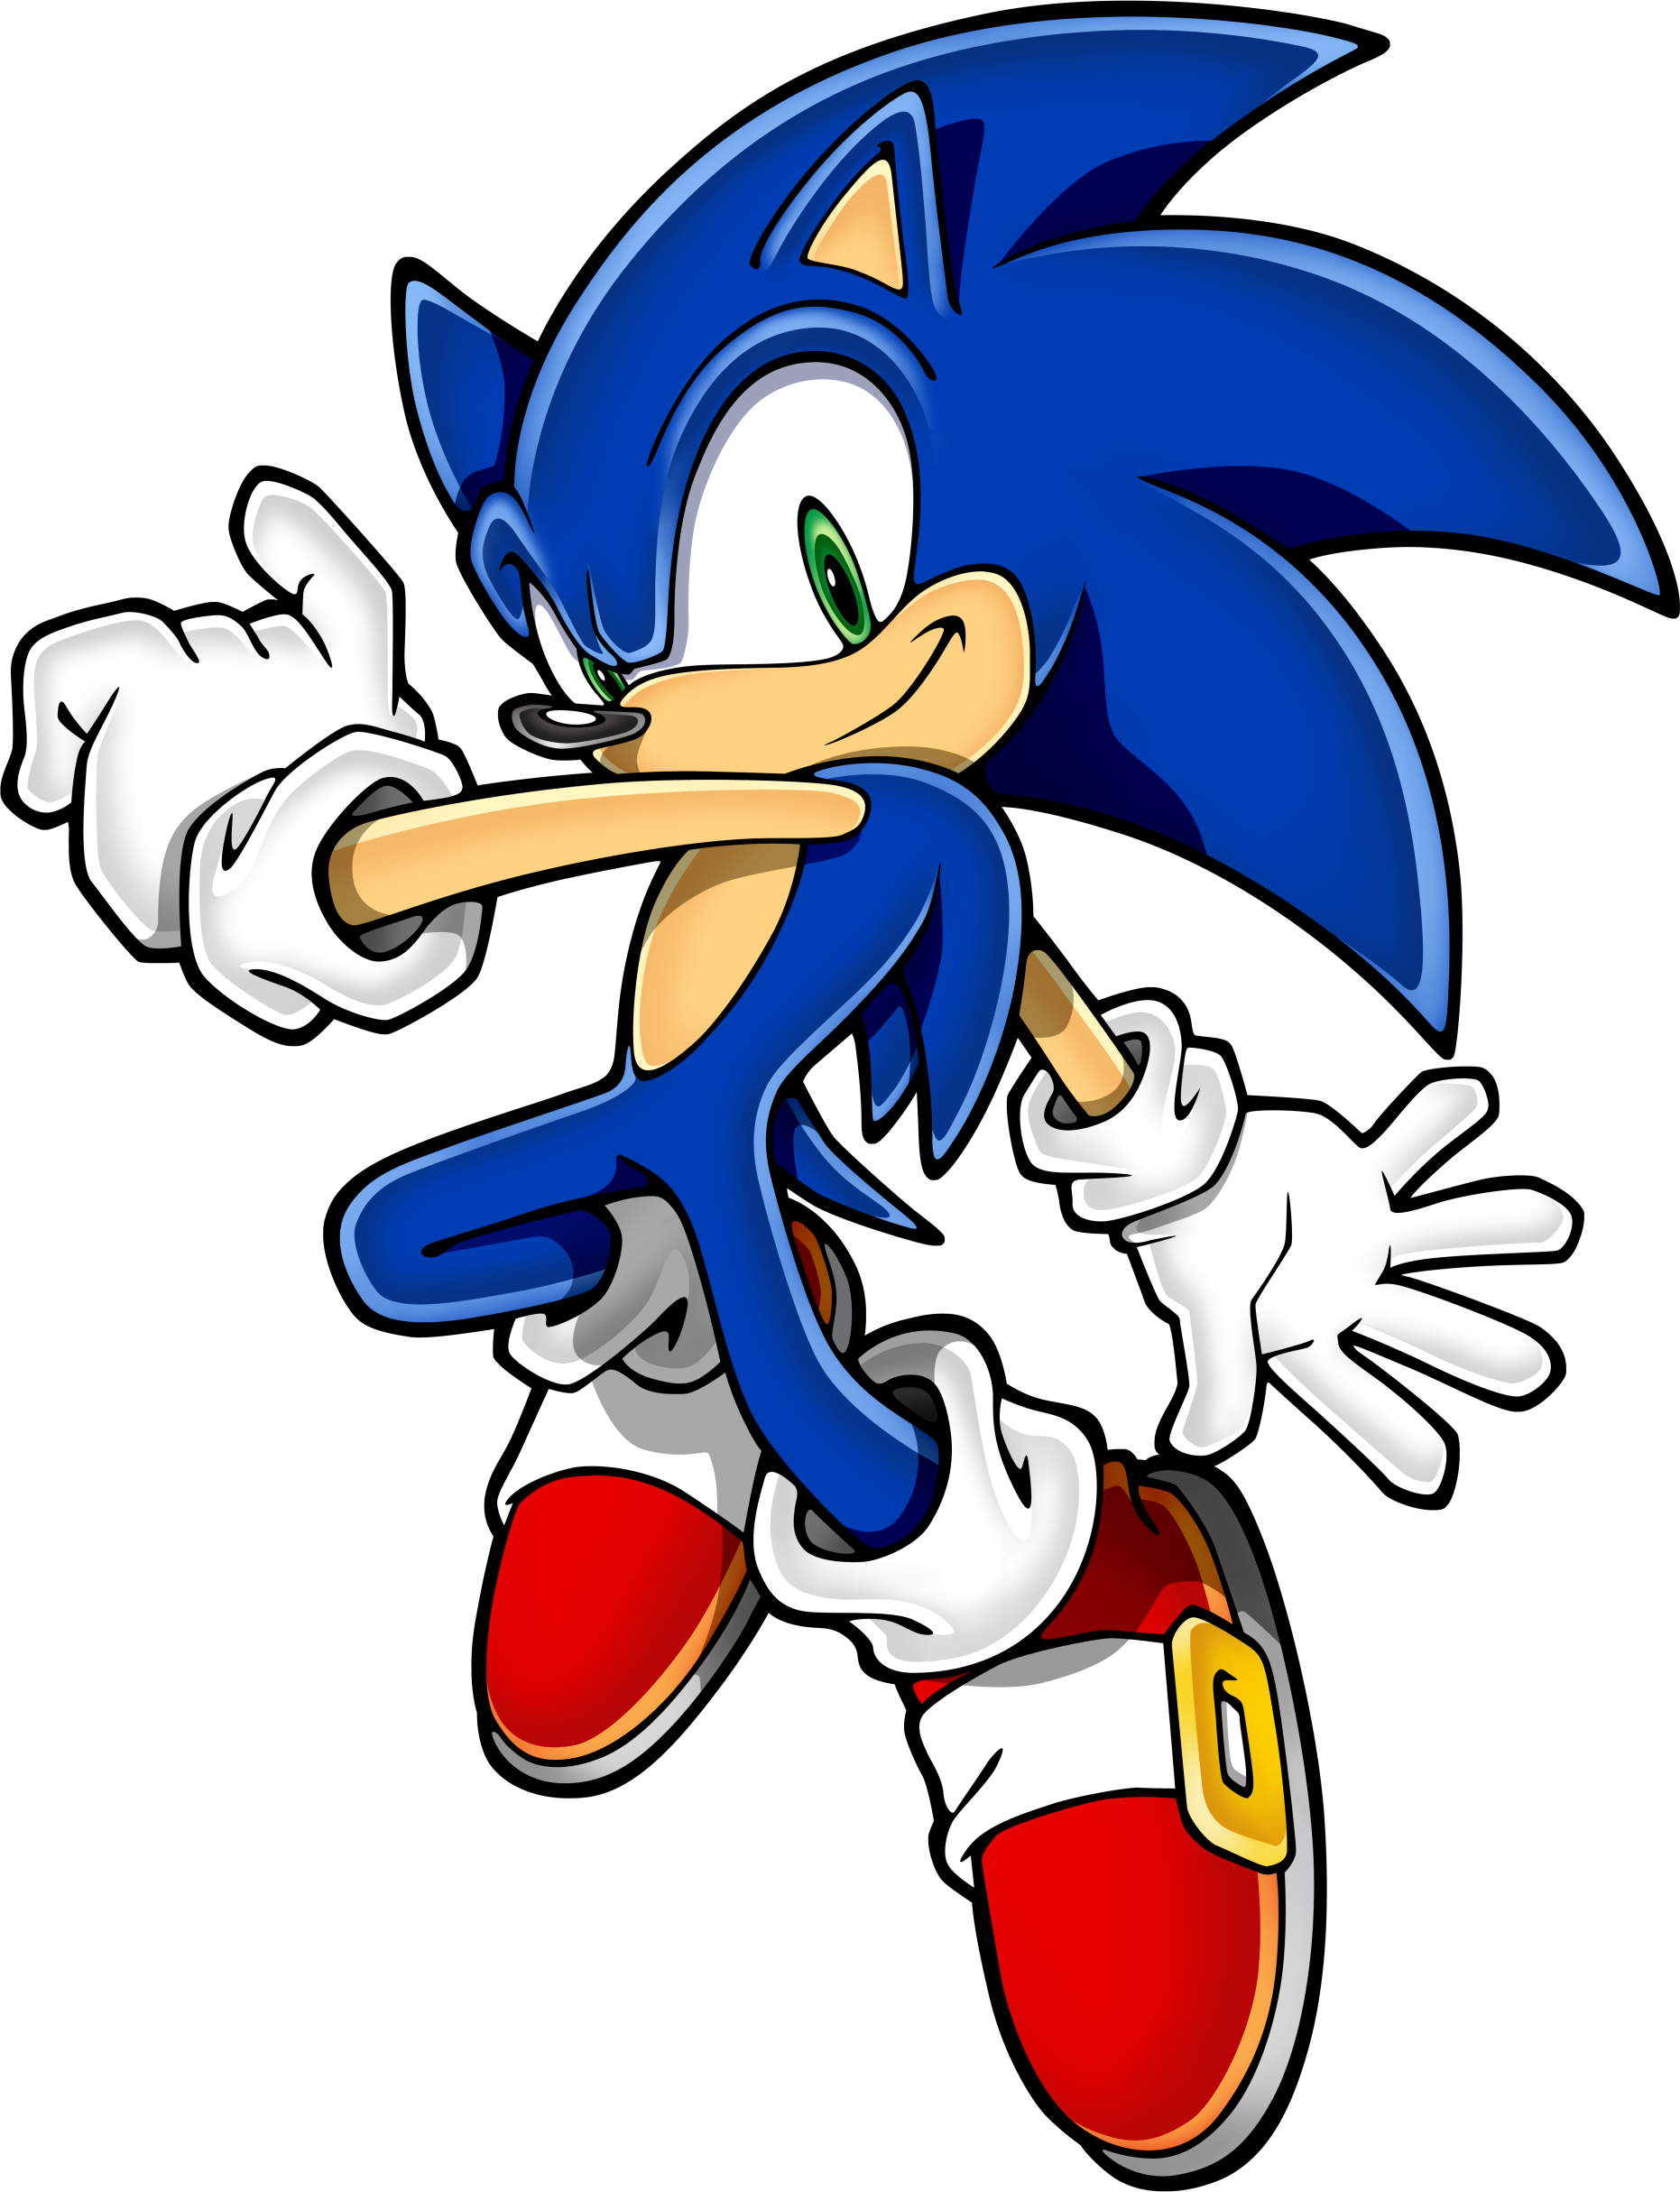 Sonic the hedgehog hd clipart